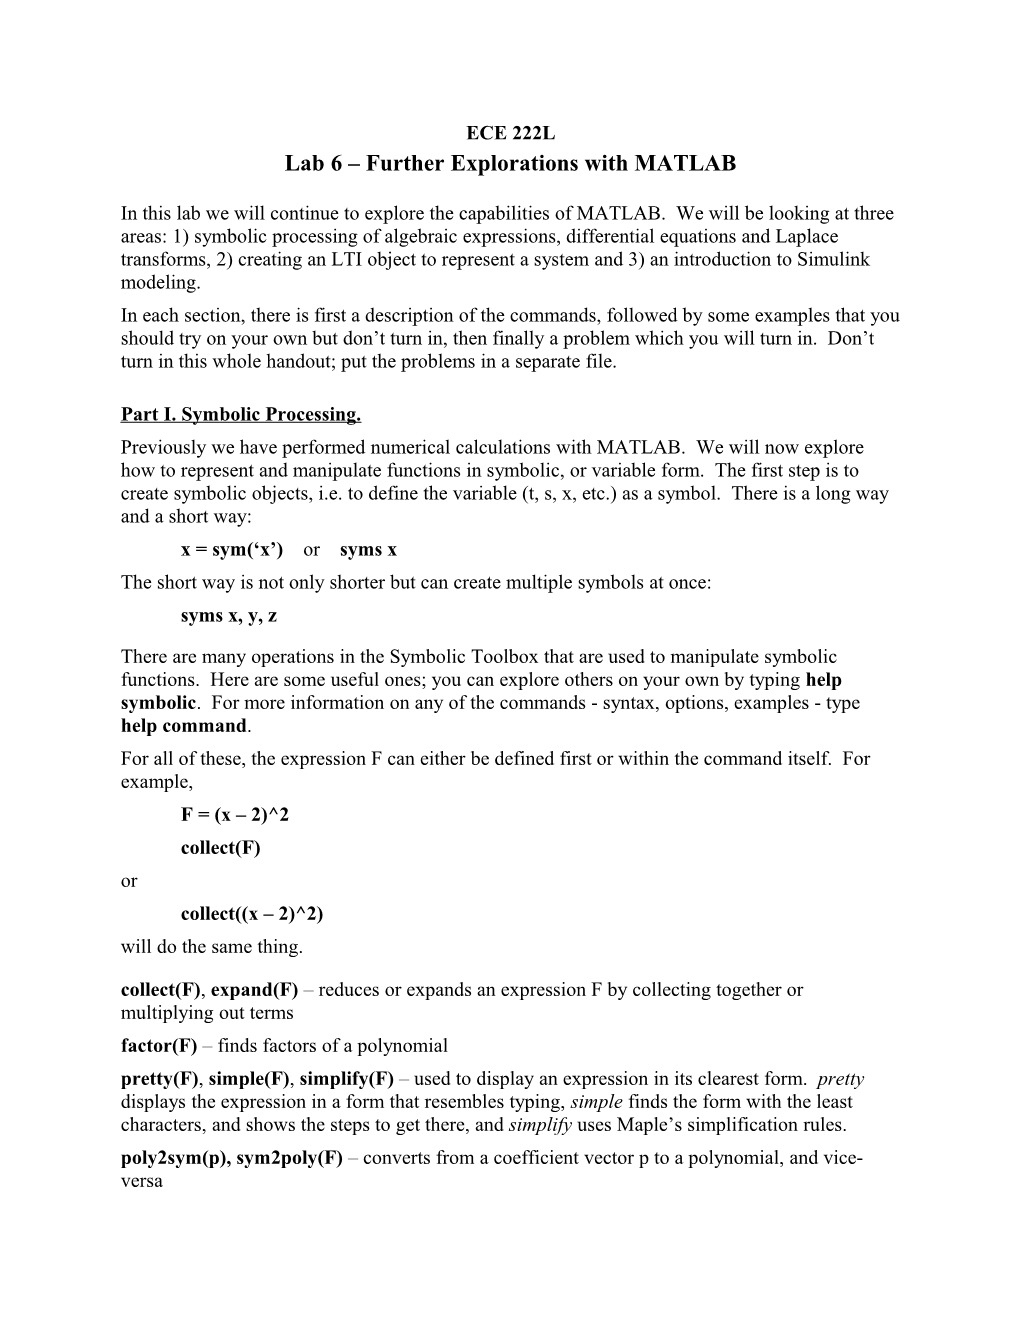 Lab 6 Further Explorations with MATLAB